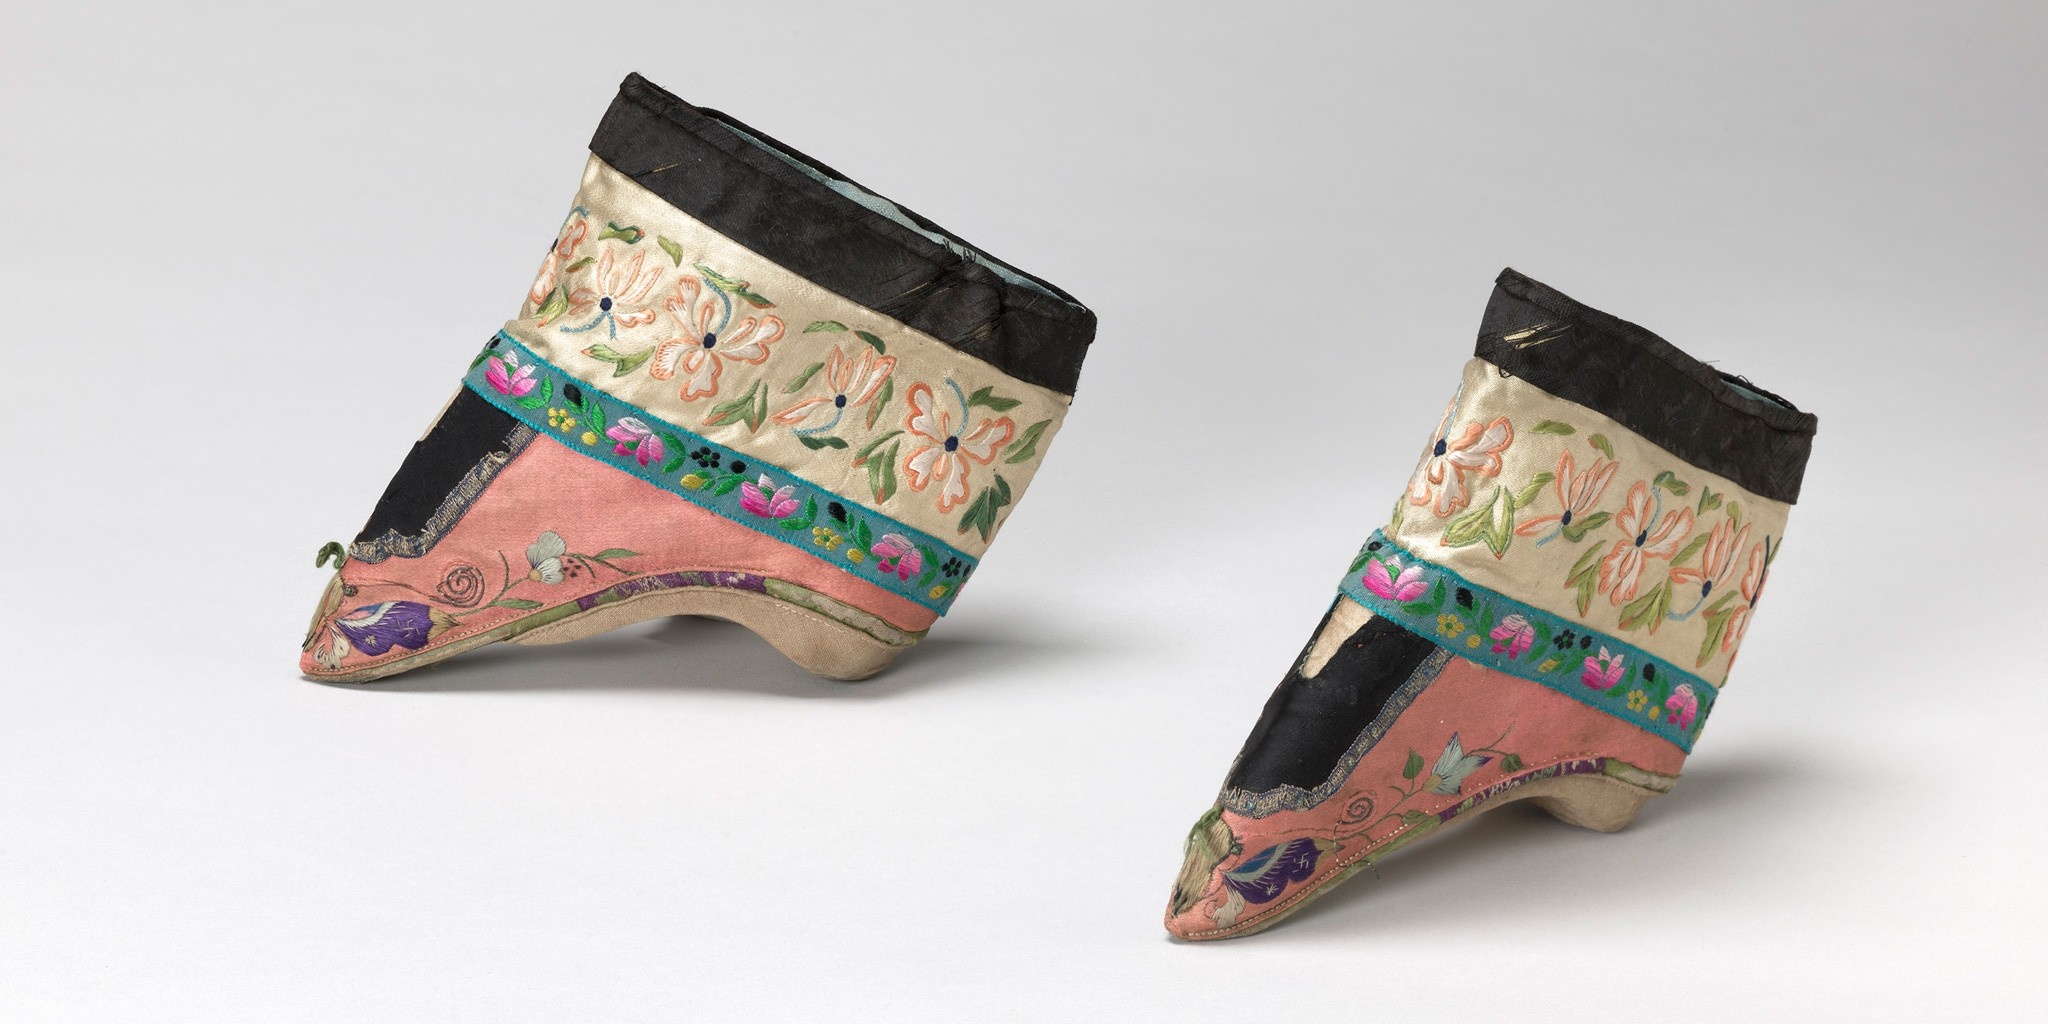 A pair of pink-and-cream-colored ankle-high shoes with embroidered flowers, leaves, and a purple-winged butterfly at the toe.